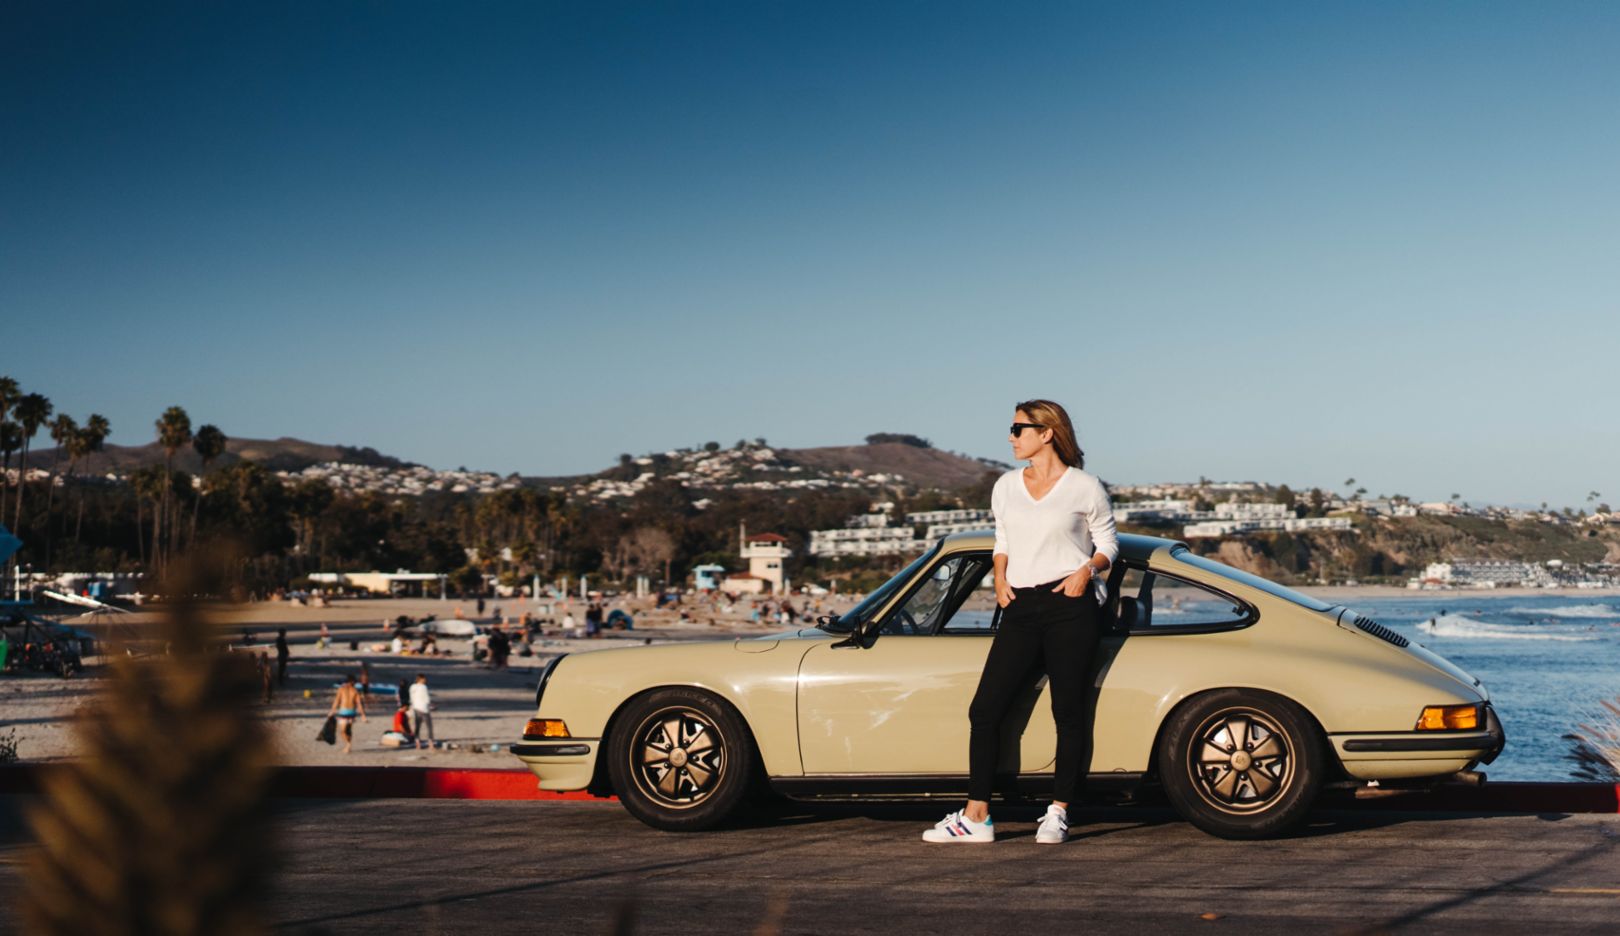 California Dreamin’: live in the moment and enjoy life. Things are going well in Newport Beach—here, with Lara's 911 T model.